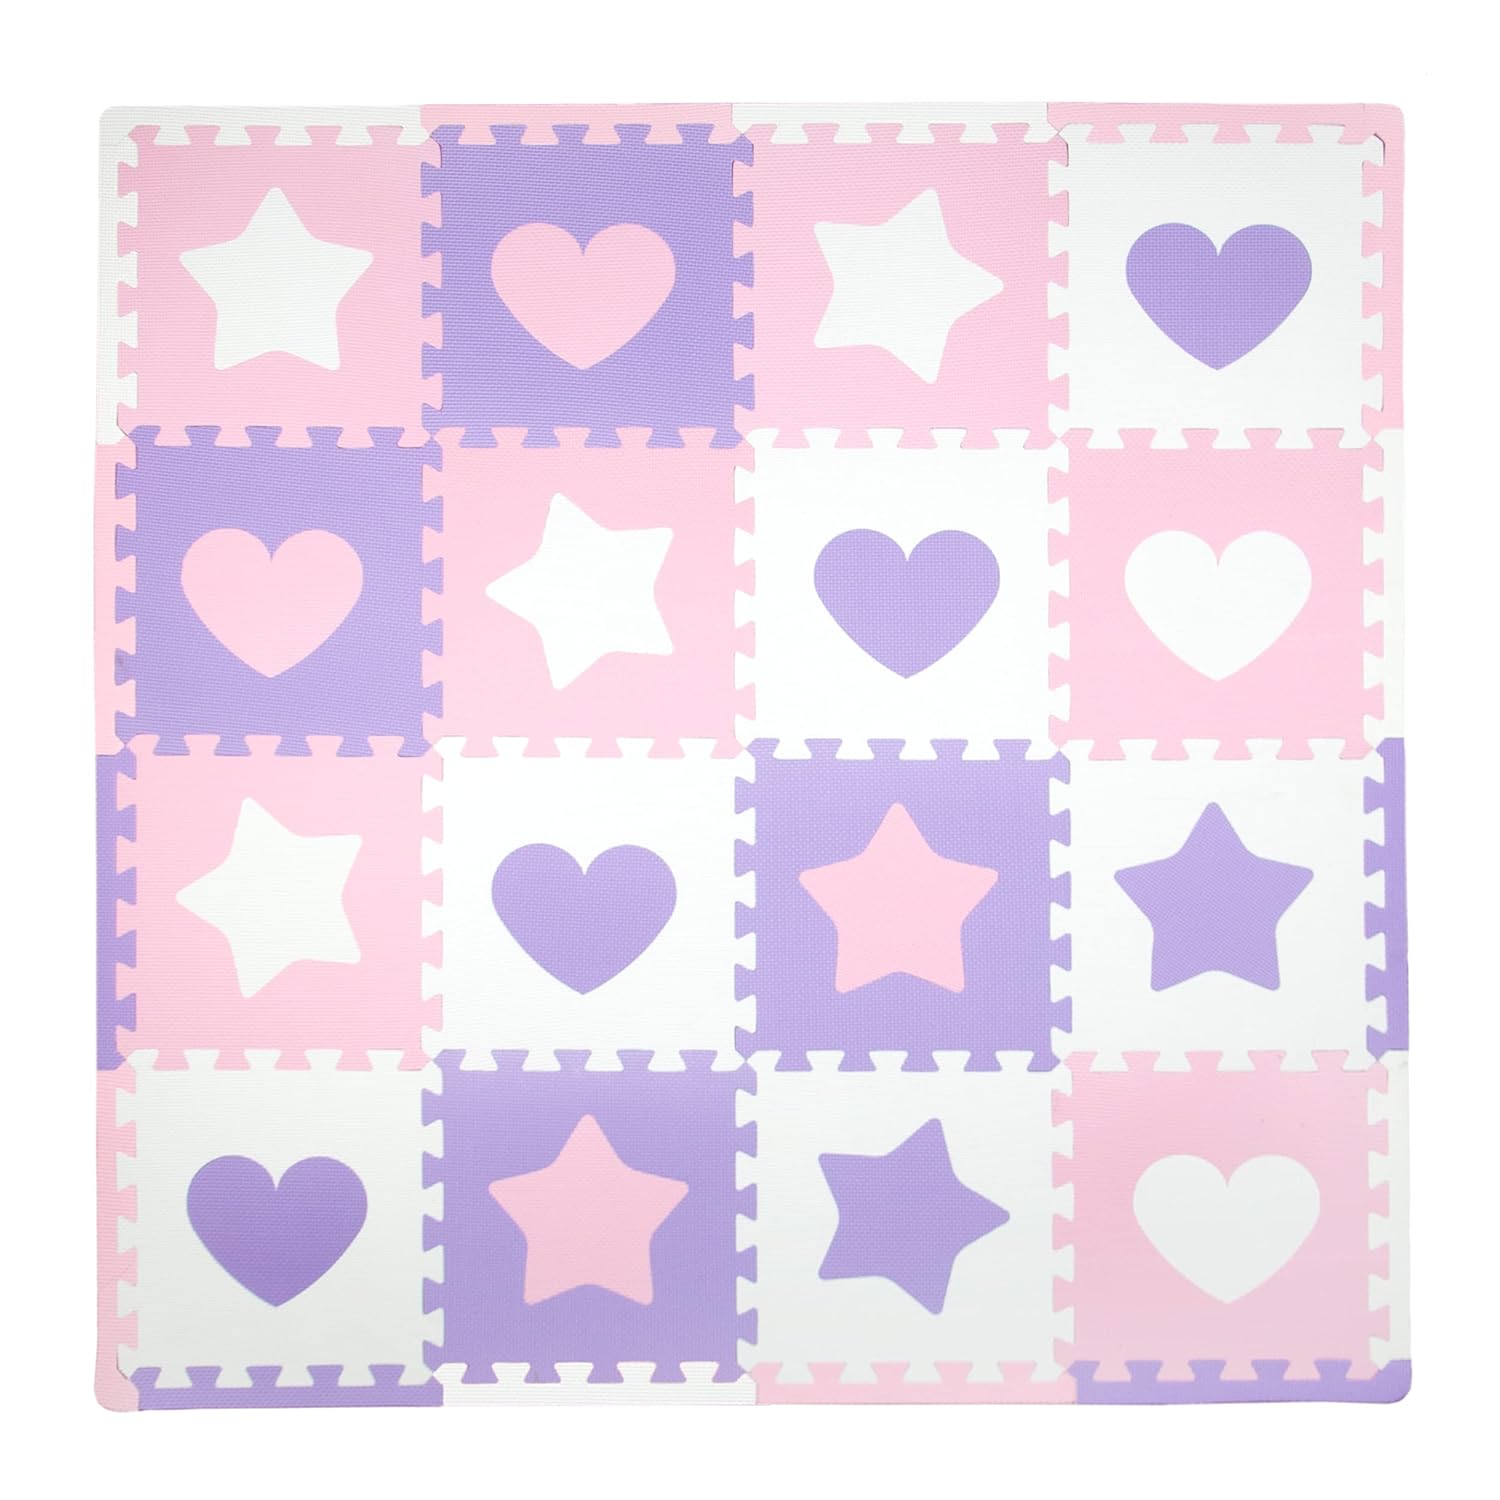 Tadpoles Hearts and Stars Foam Playmats for Baby and Kids, 16 Interlocking Play Mat, Waterproof, Durable, Long-lasting | Total Floor Coverage 50” x 50” | Pink, Purple - image 1 of 6